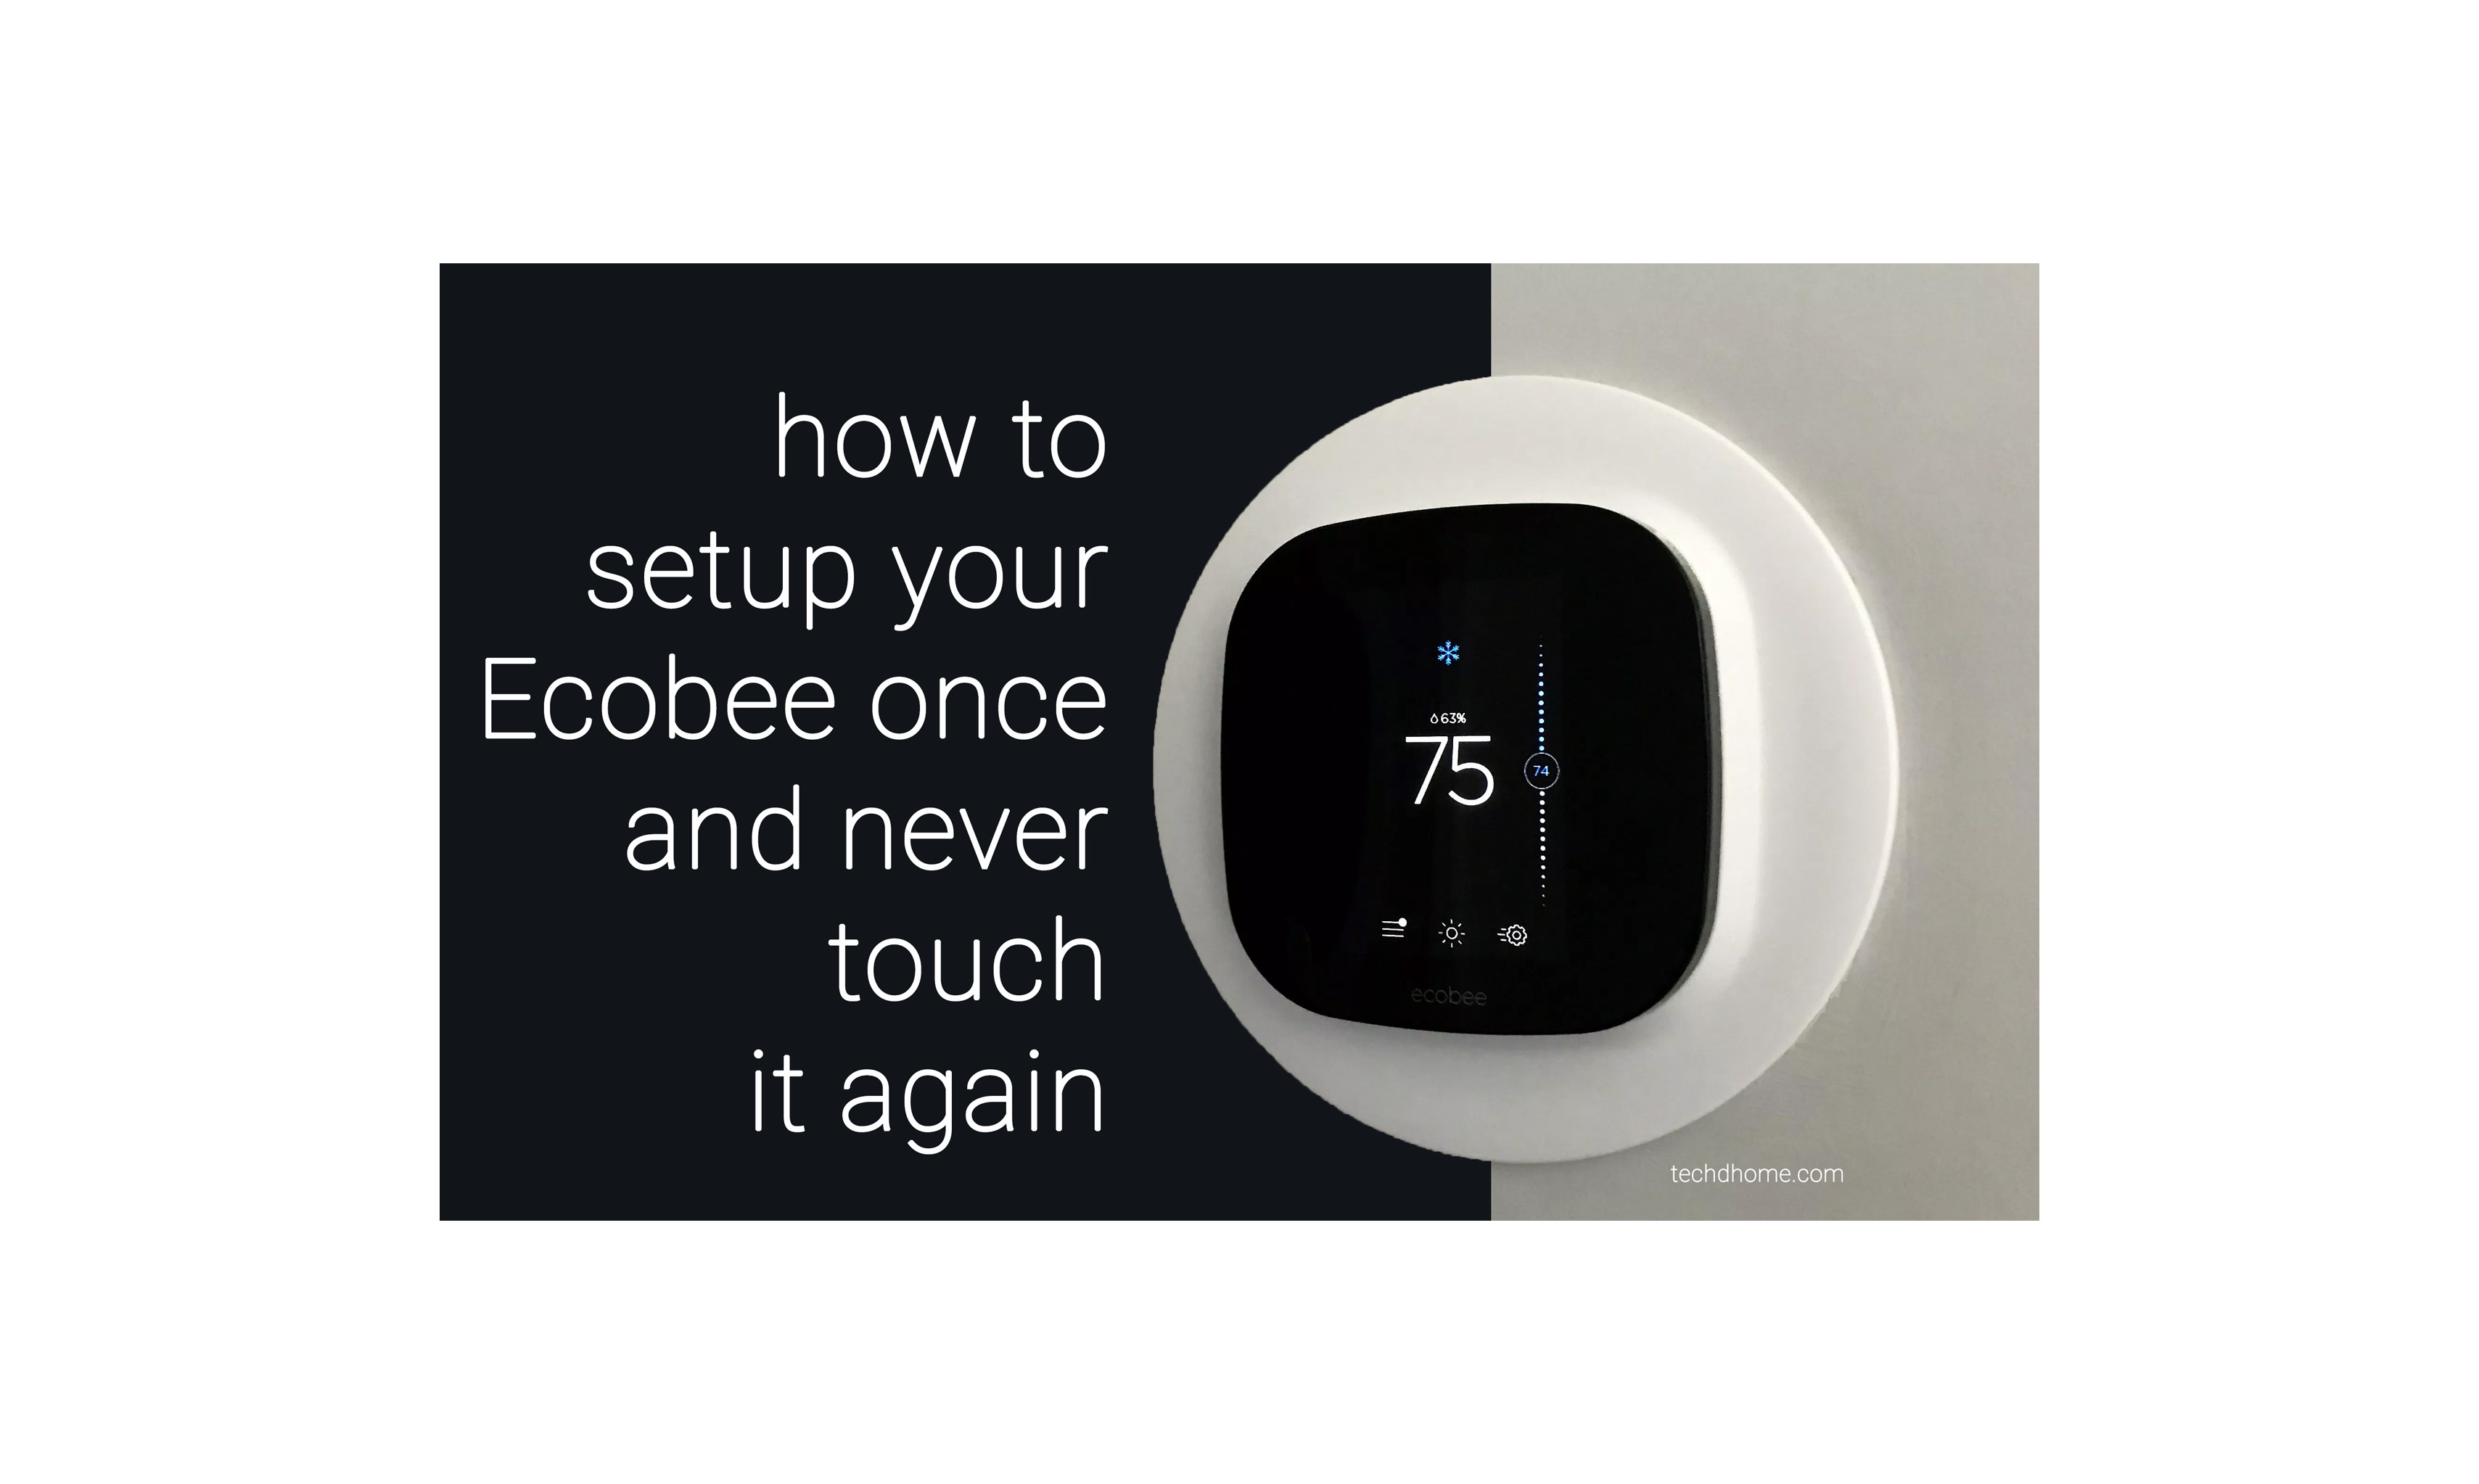 setup-your-ecobee-thermostat-once-and-never-touch-it-again-techdhome